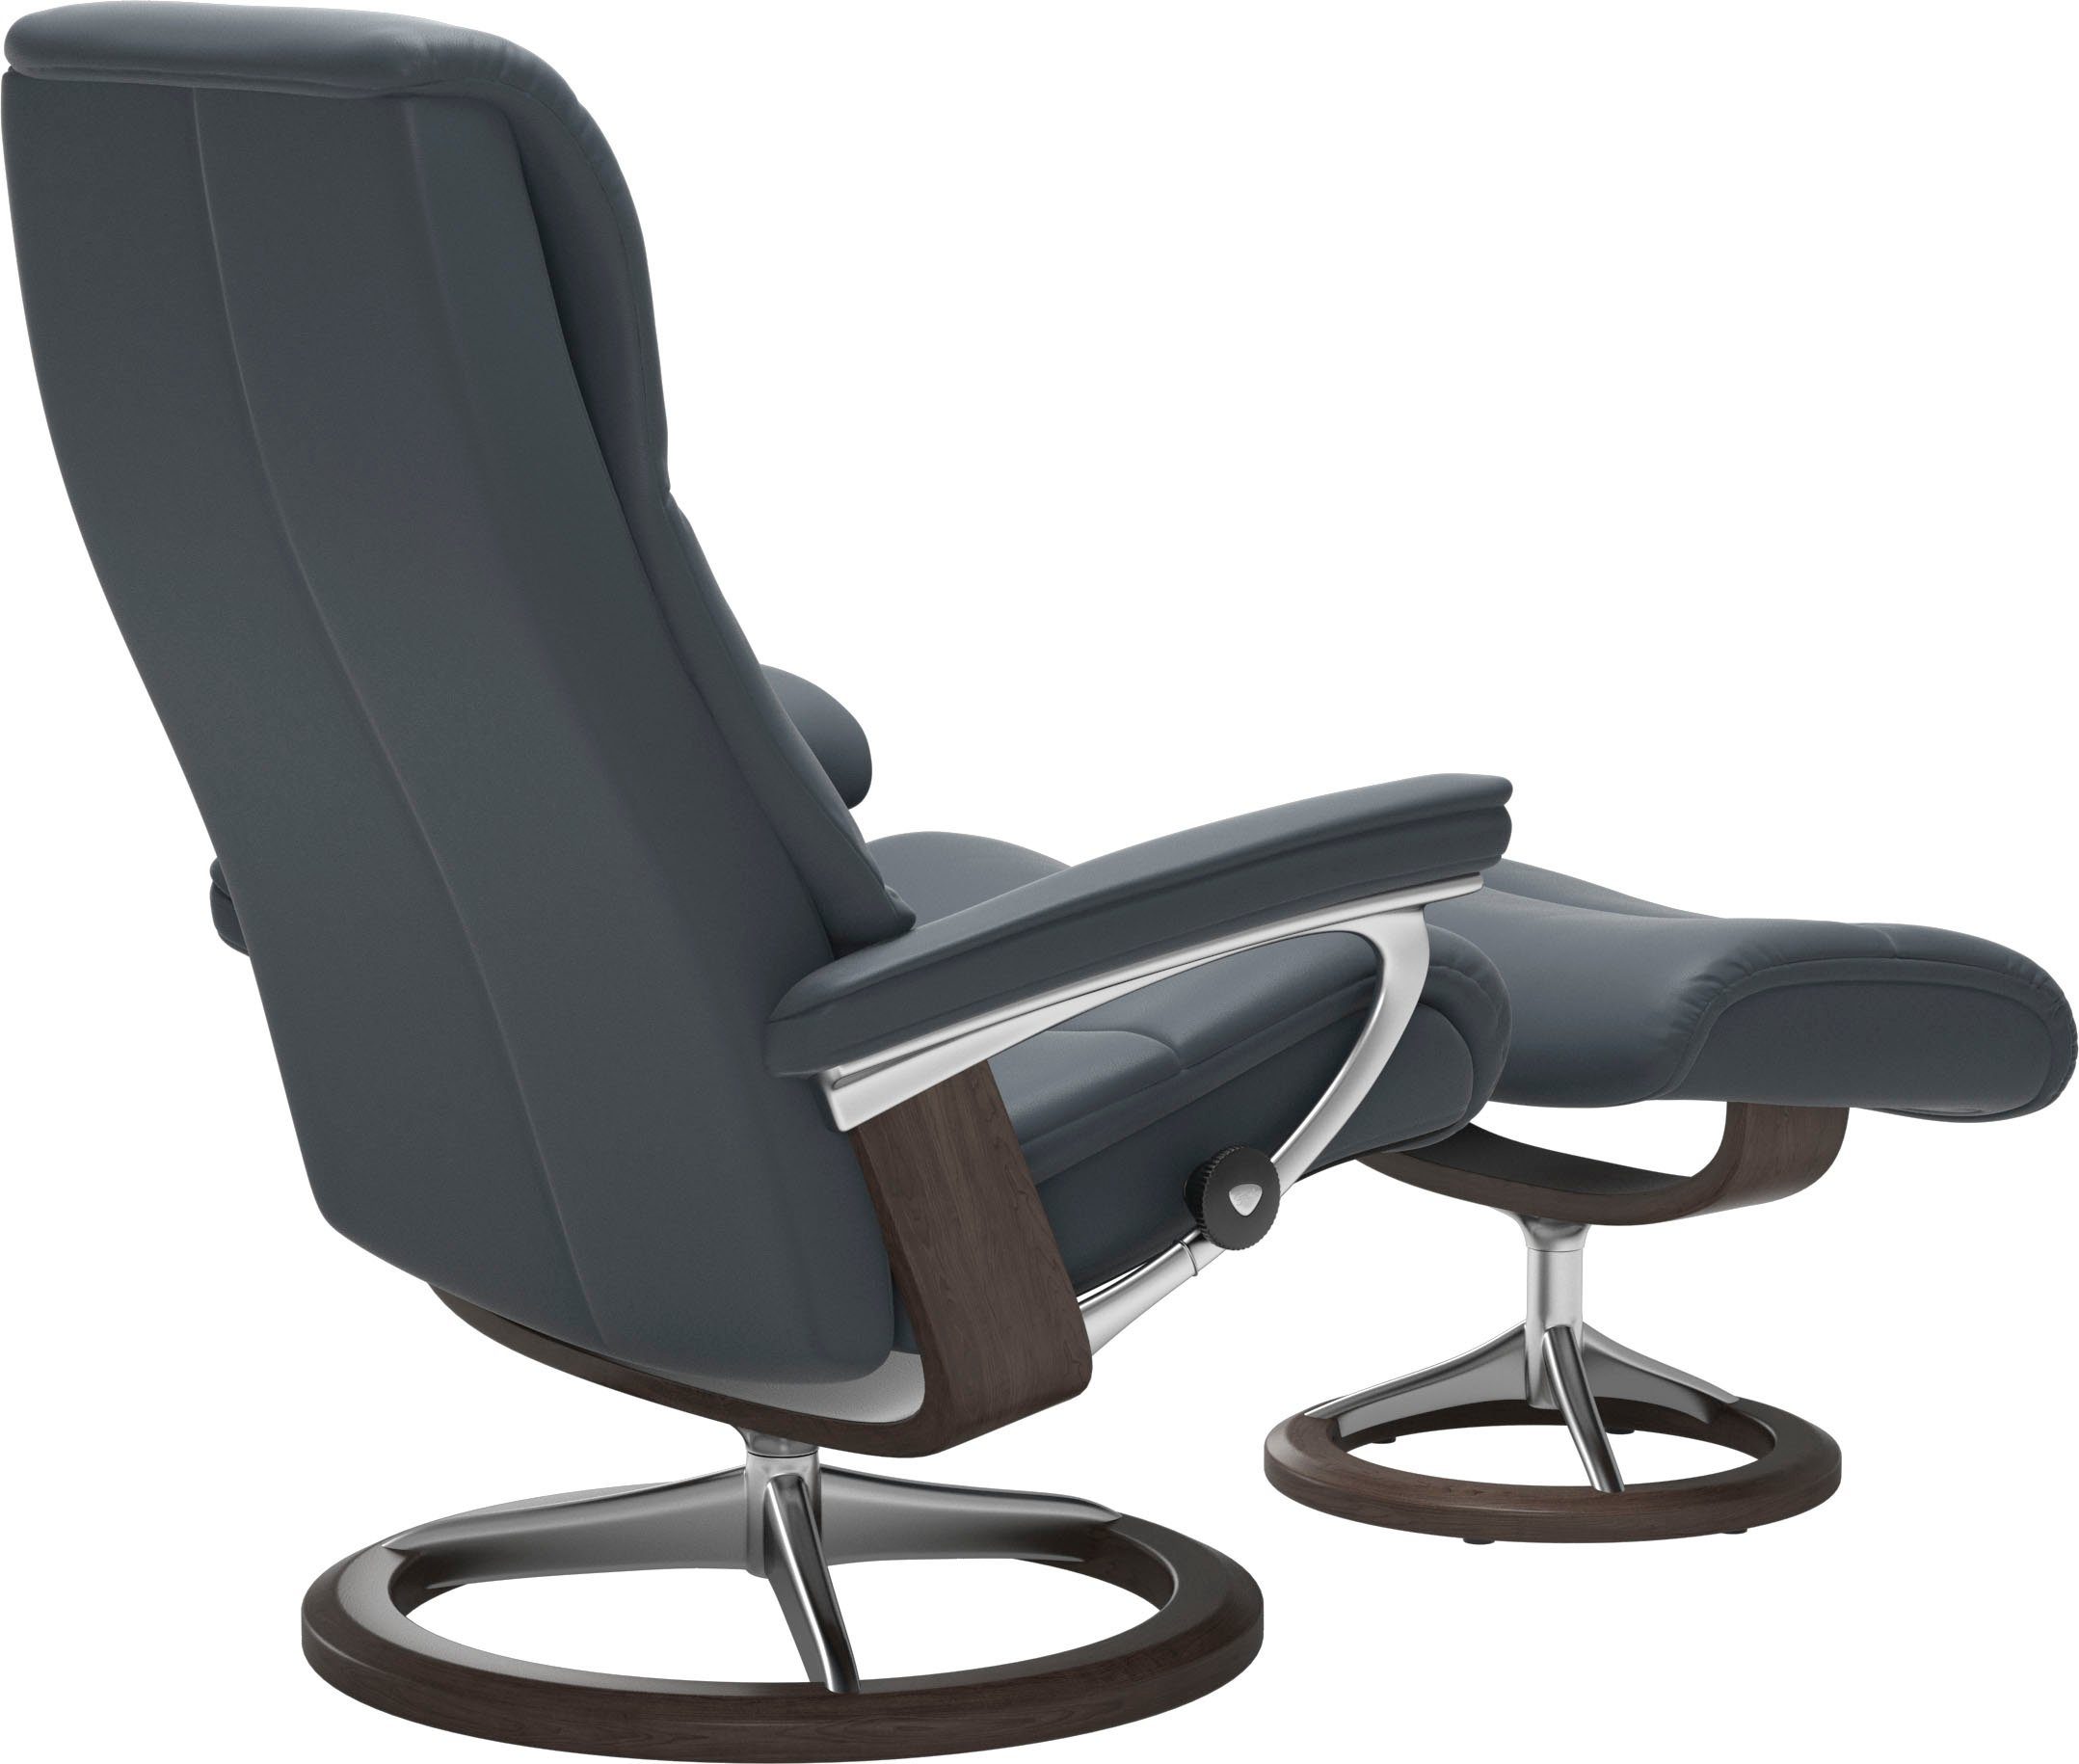 Signature Relaxsessel mit Stressless® Base, View, S,Gestell Wenge Größe